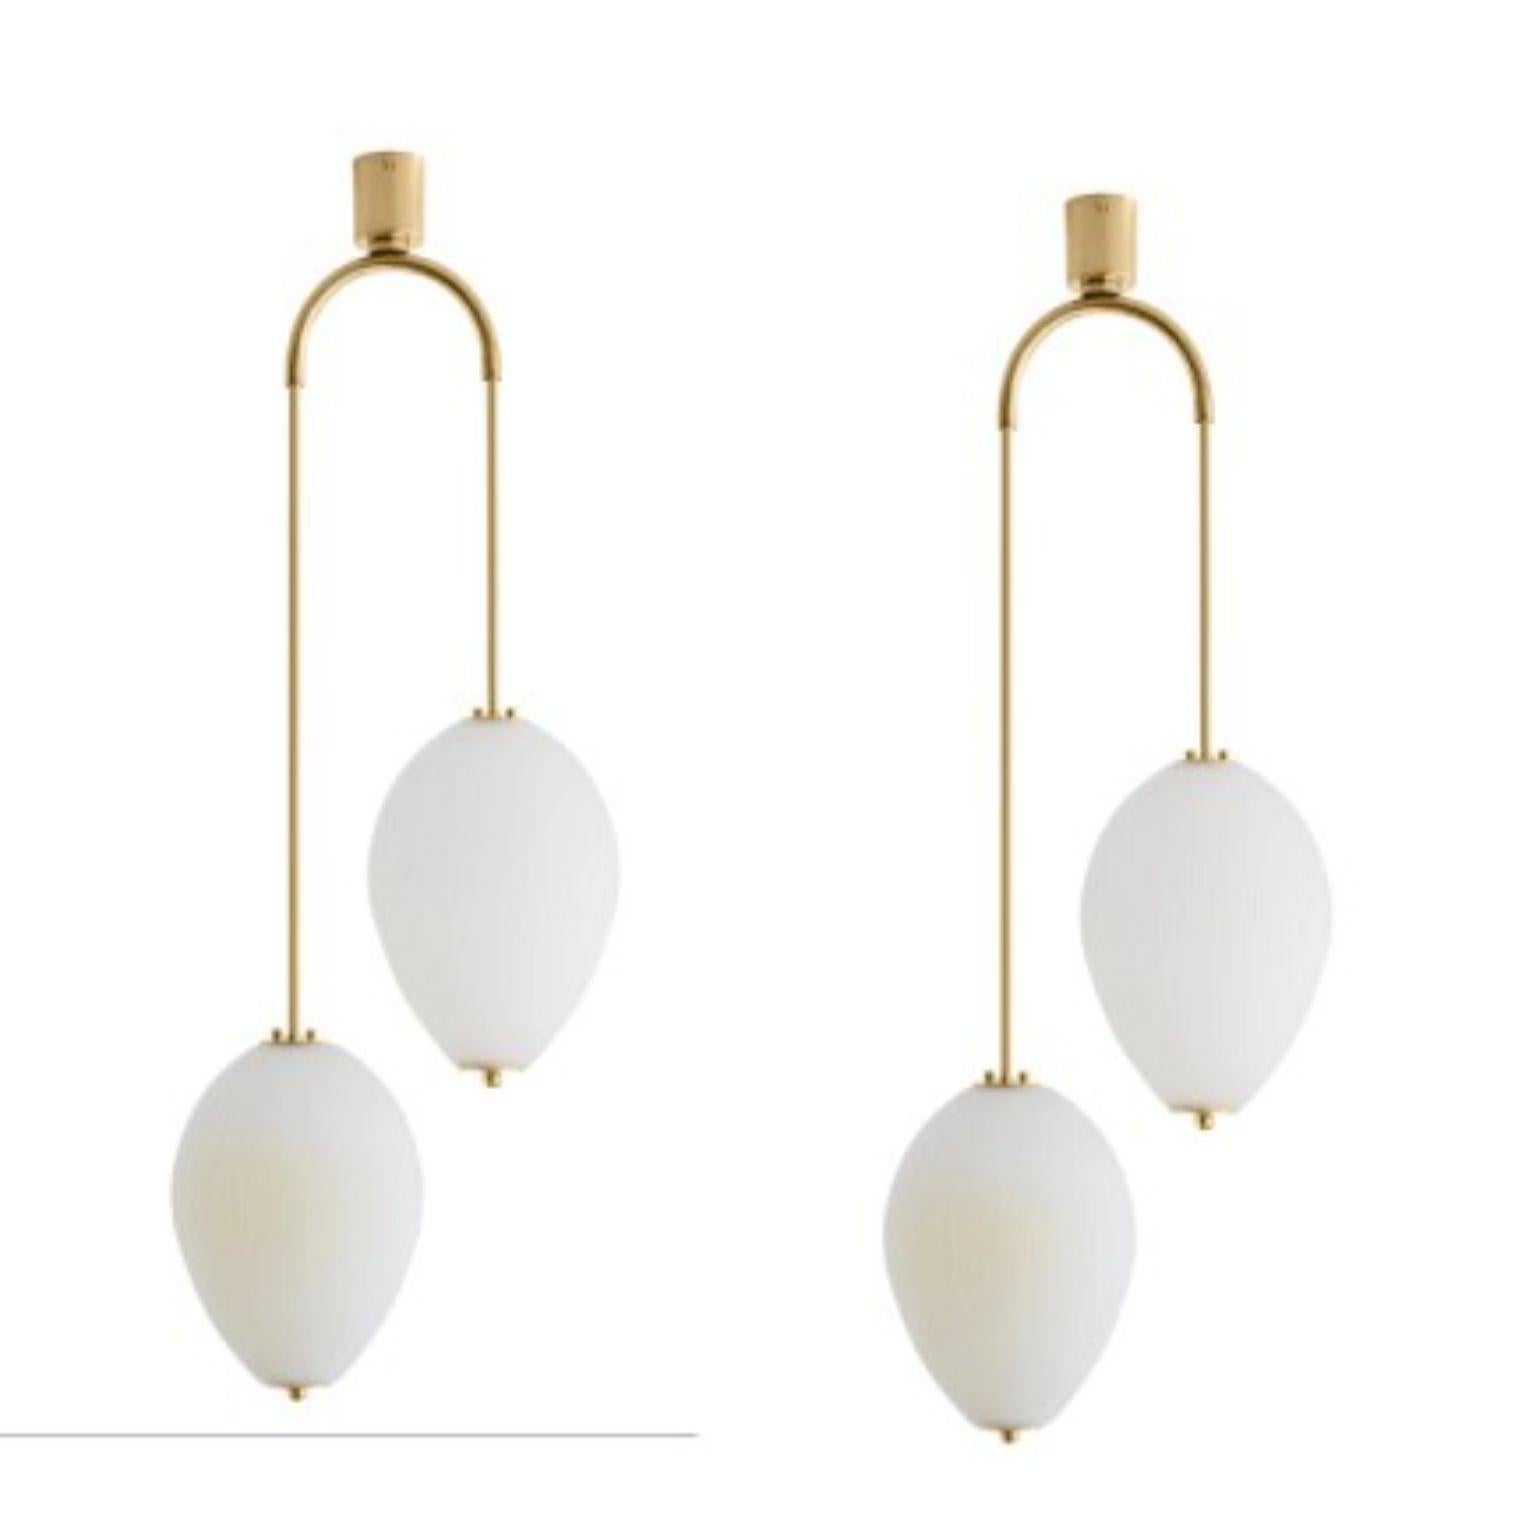 Double chandelier China 10 by Magic Circus Editions
Dimensions: H 121.5 x W 44.3 x D 25.2 cm
Materials: Brass, mouth blown glass sculpted with a diamond saw
Colour: ivory

Available finishes: brass, nickel
Available colours: enamel soft white,